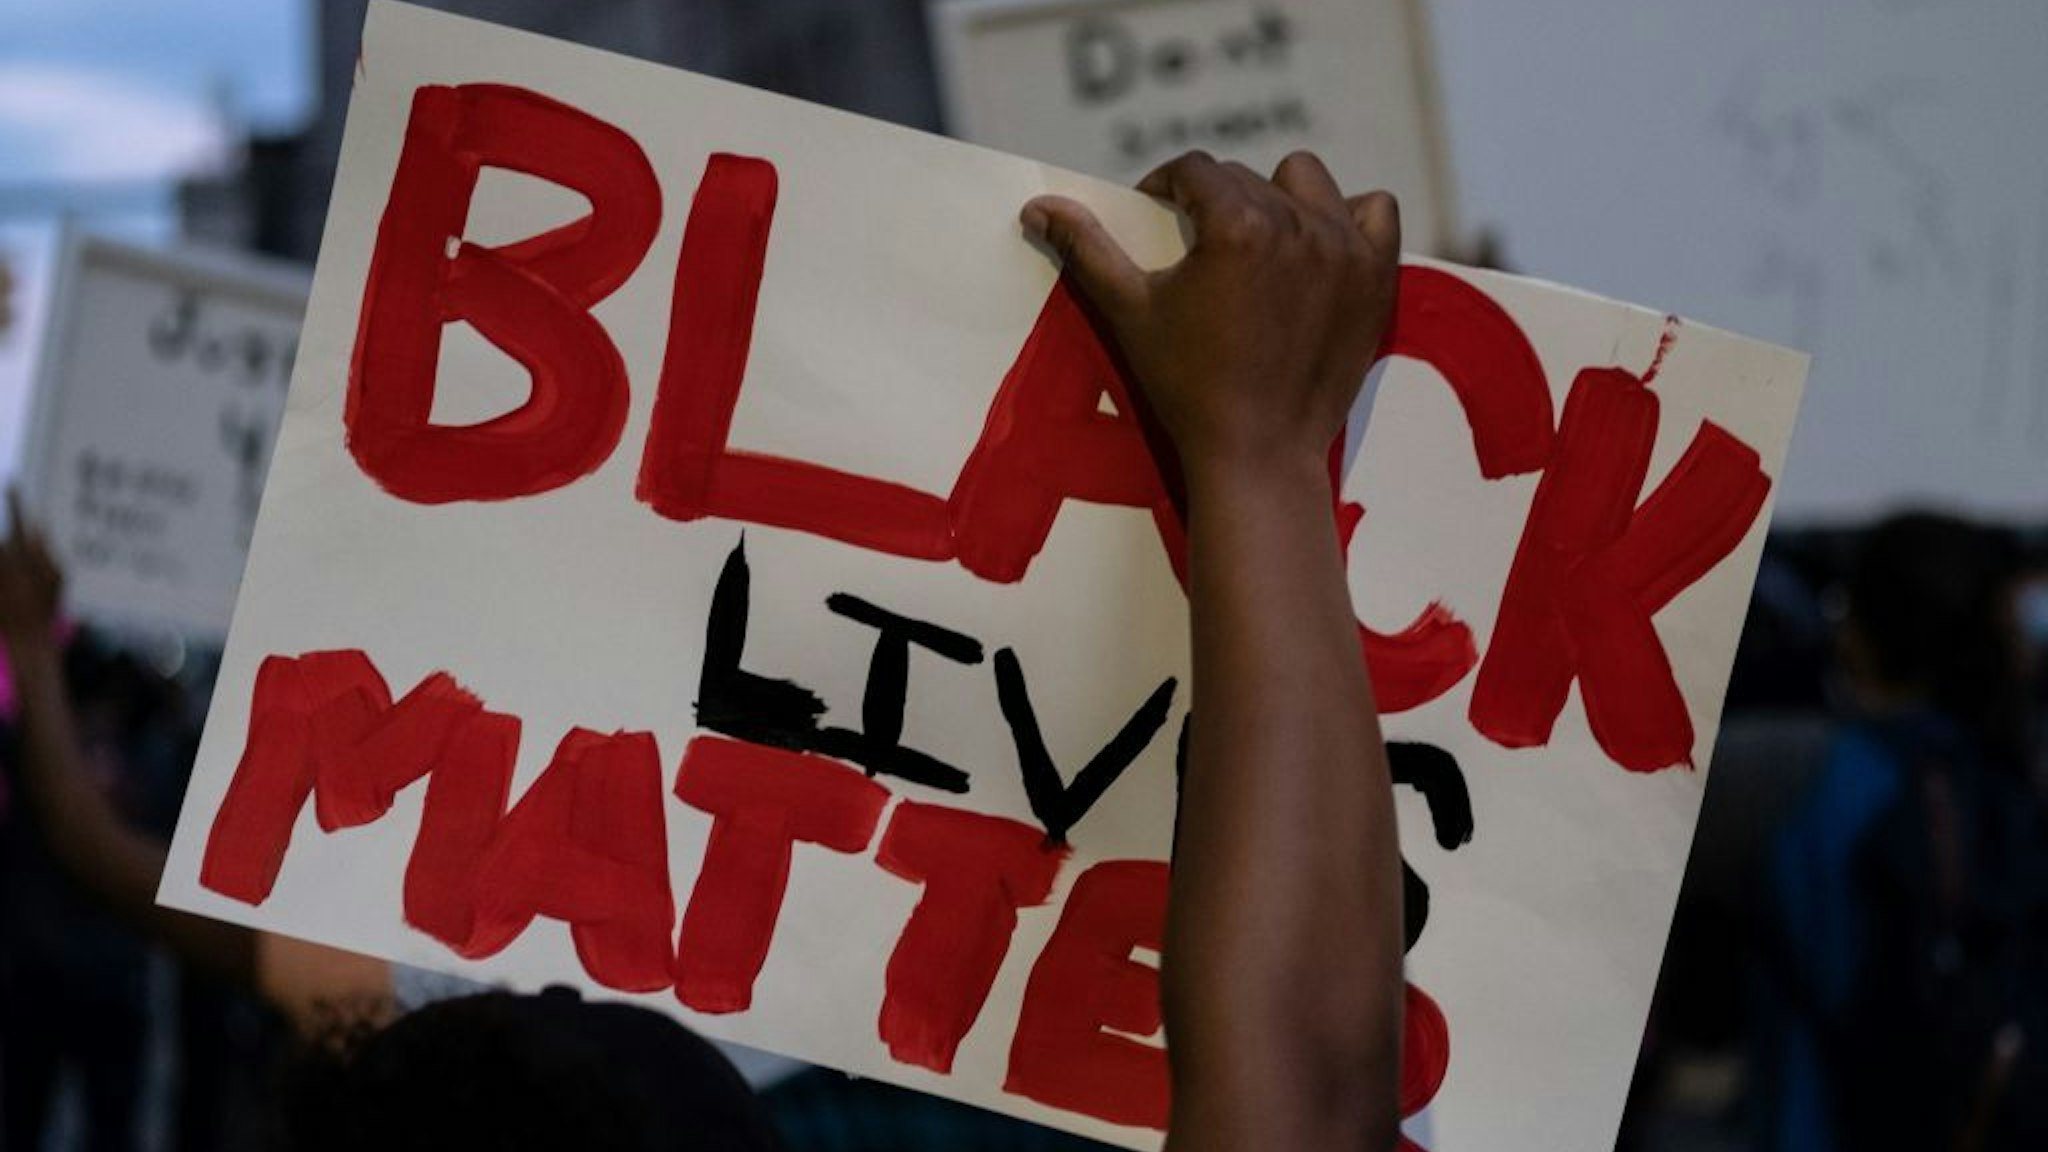 A person holds up a placard that reads, 'Black lives matter' during a protest in the city of Detroit, Michigan, on May 29, 2020, during a demonstration over the death of George Floyd, a black man who died after a white policeman knelt on his neck for several minutes. - Violent protests erupted across the United States late on May 29, over the death of a handcuffed black man in police custody, with murder charges laid against the arresting Minneapolis officer failing to quell boiling anger. (Photo by SETH HERALD / AFP) (Photo by SETH HERALD/AFP via Getty Images)